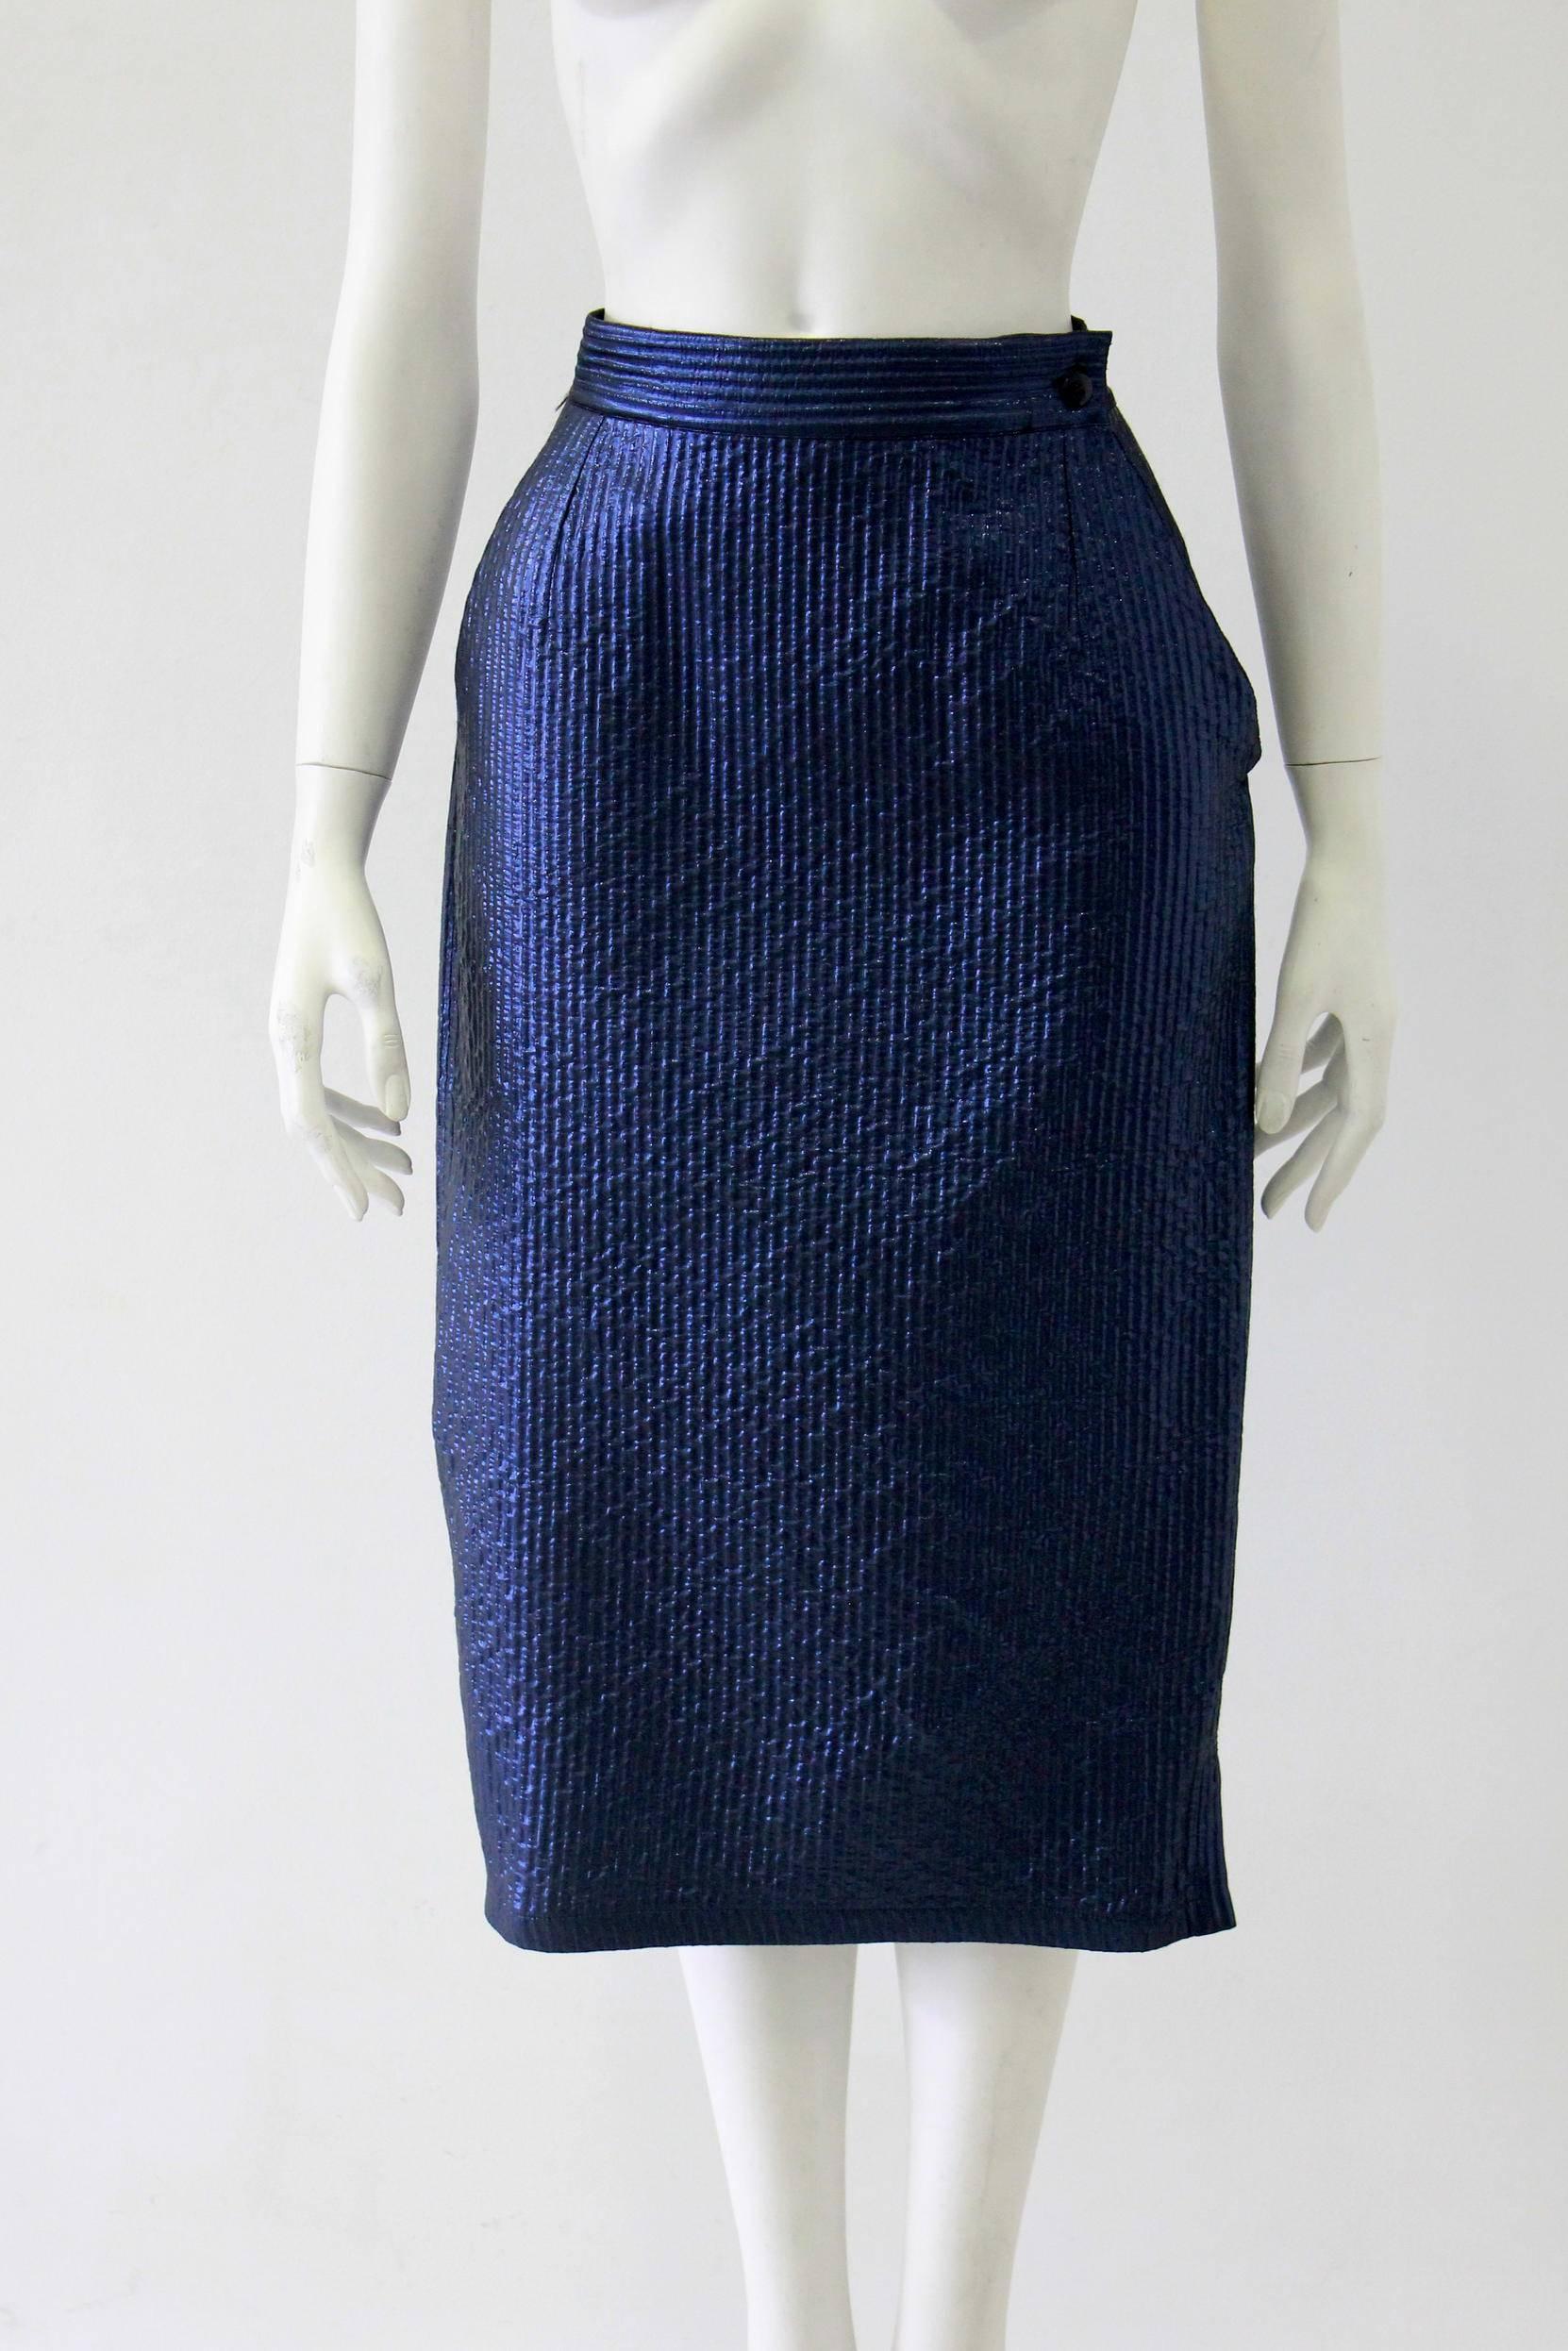 Early Gianni Versace Lurex Skirt Ecxeptional Blue Color From Spring 1986